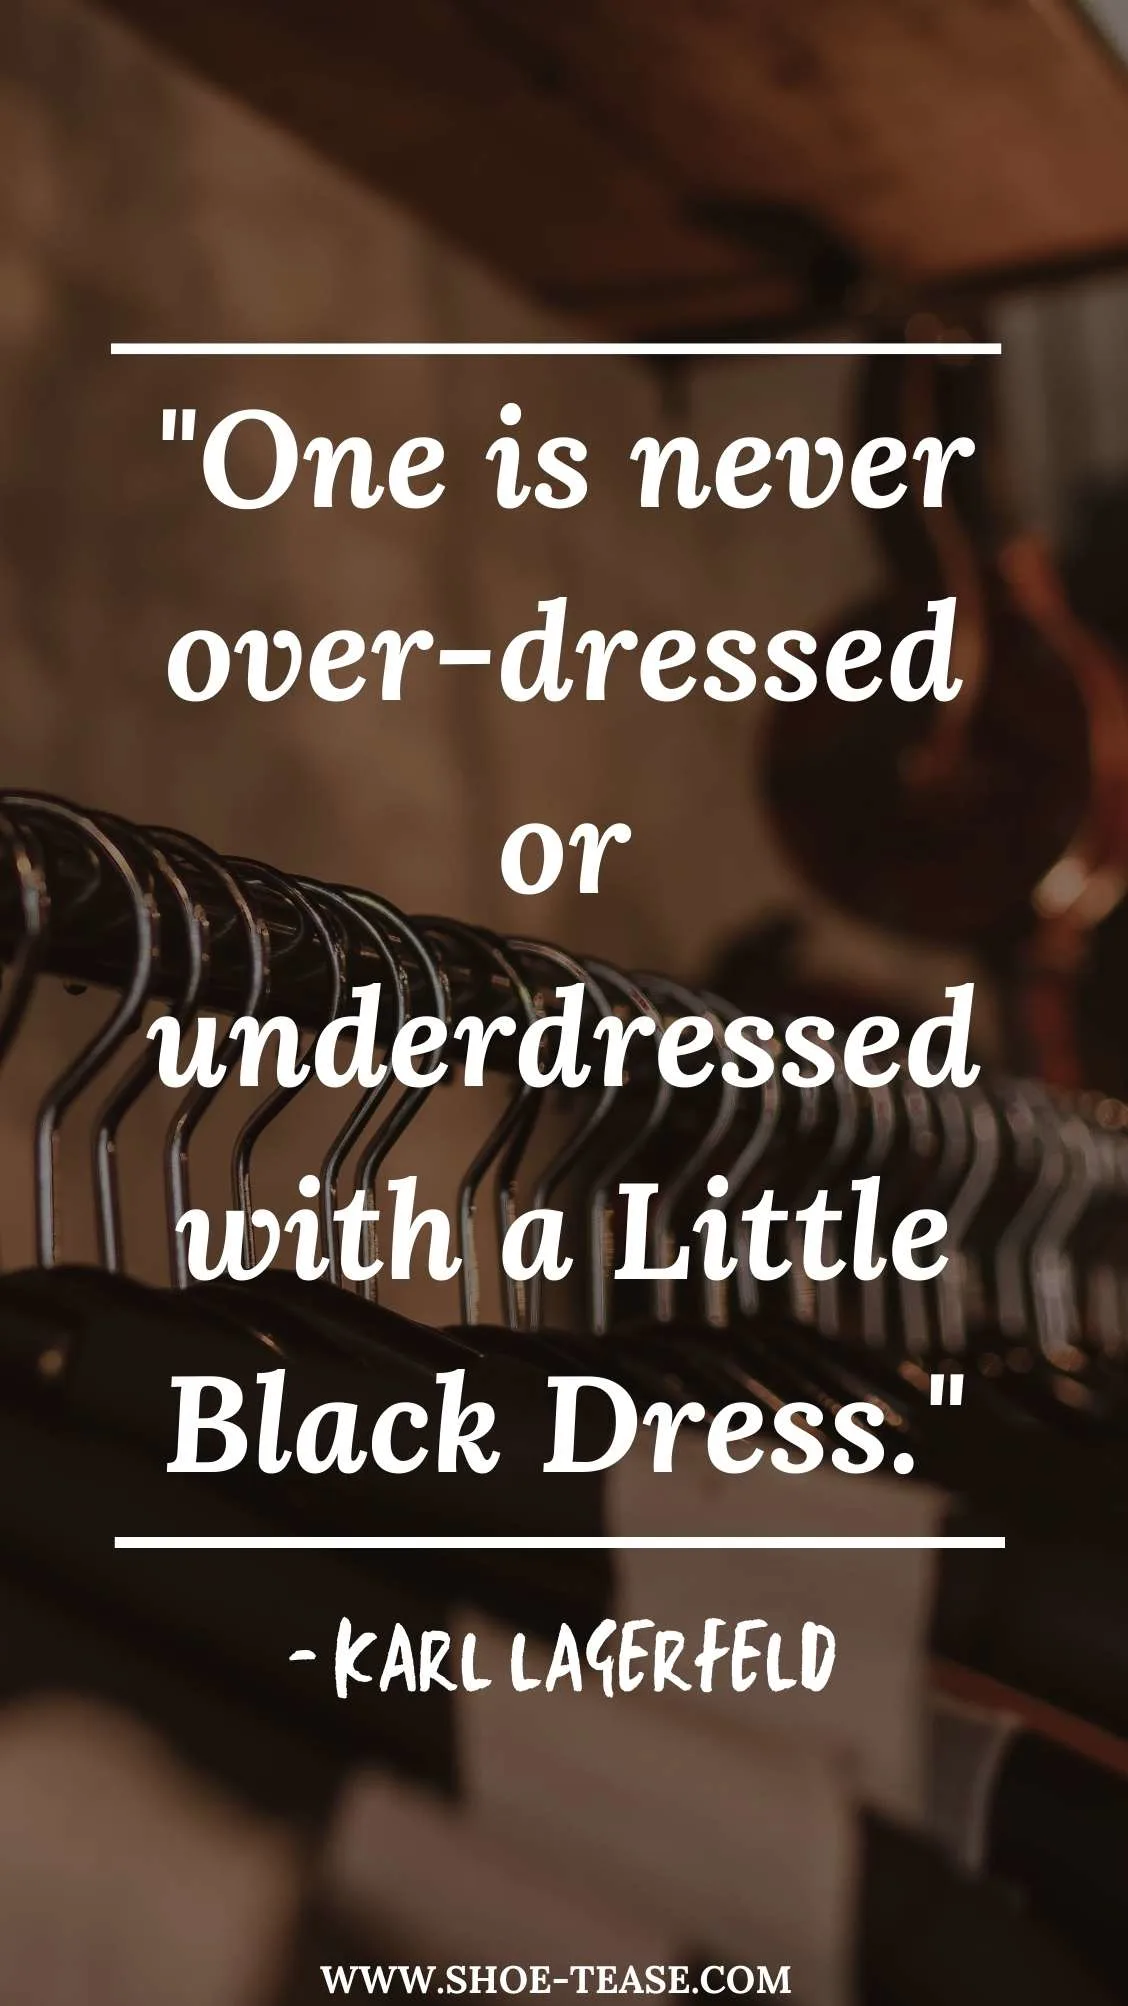 50+ Blue Dress Quotes For Instagram For All Moods & Occasions